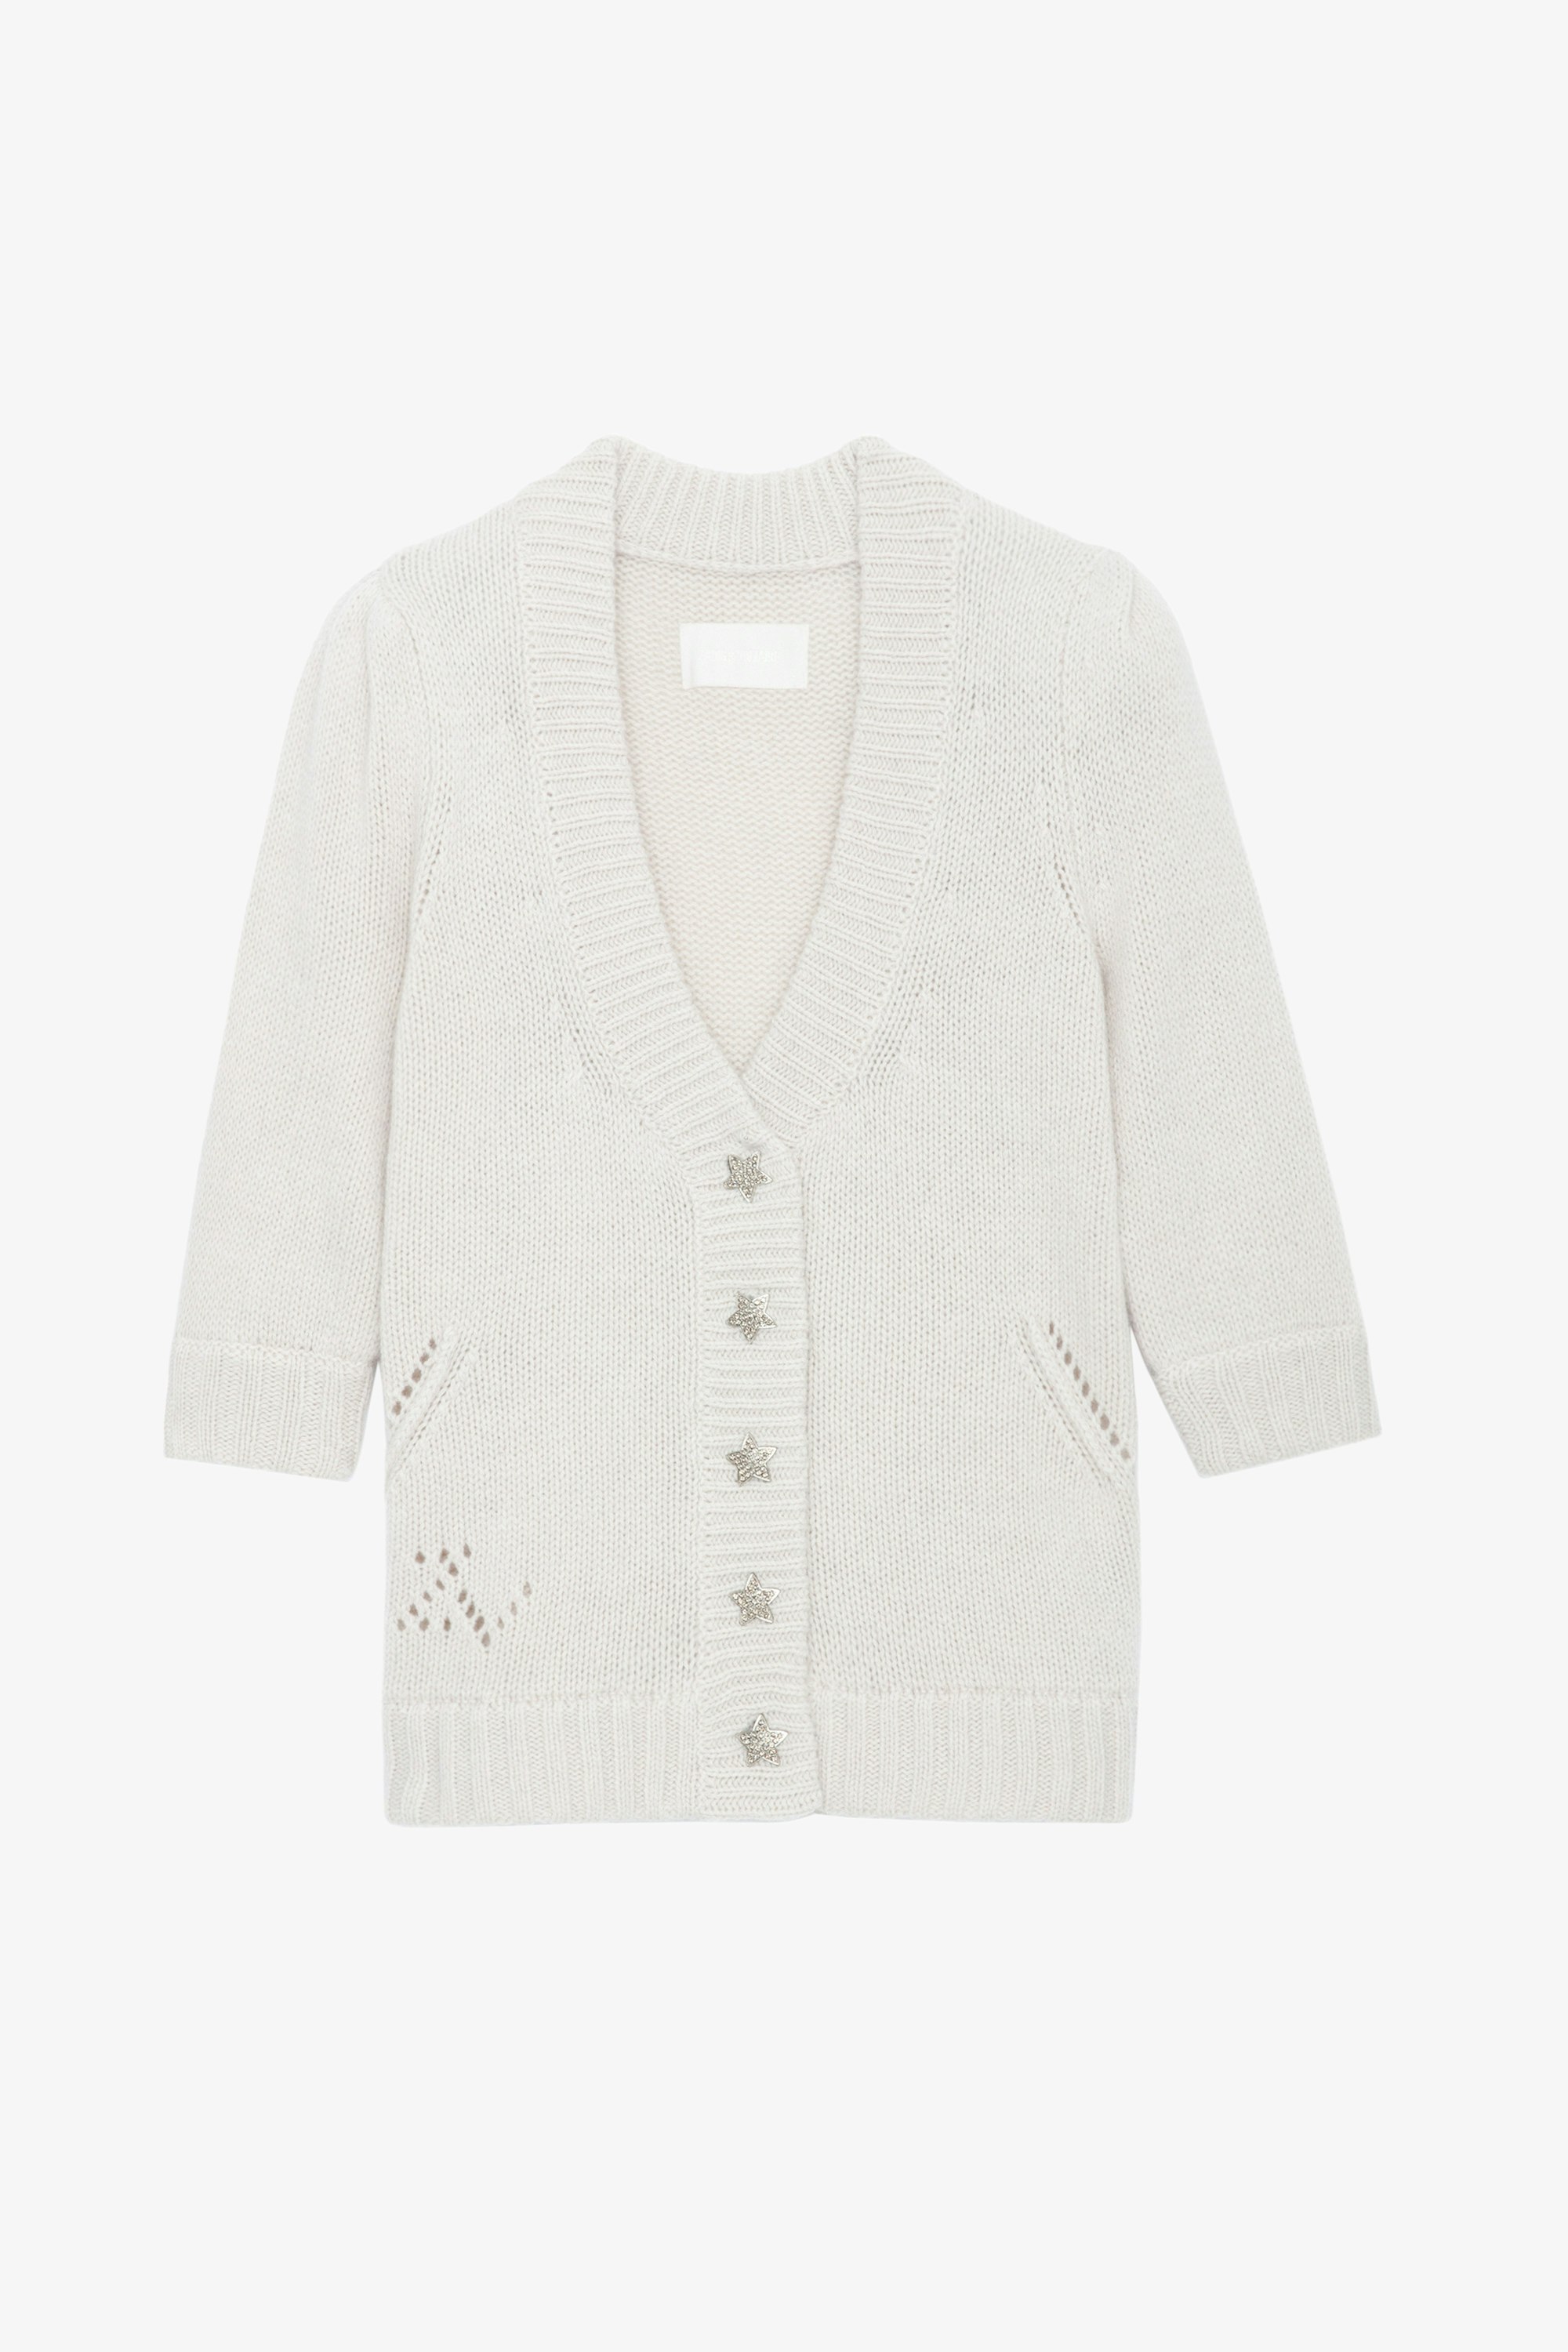 Betsy Cardigan - Ecru knit cardigan with 3/4-length sleeves, gathered shoulders and button fastening with star jewels.